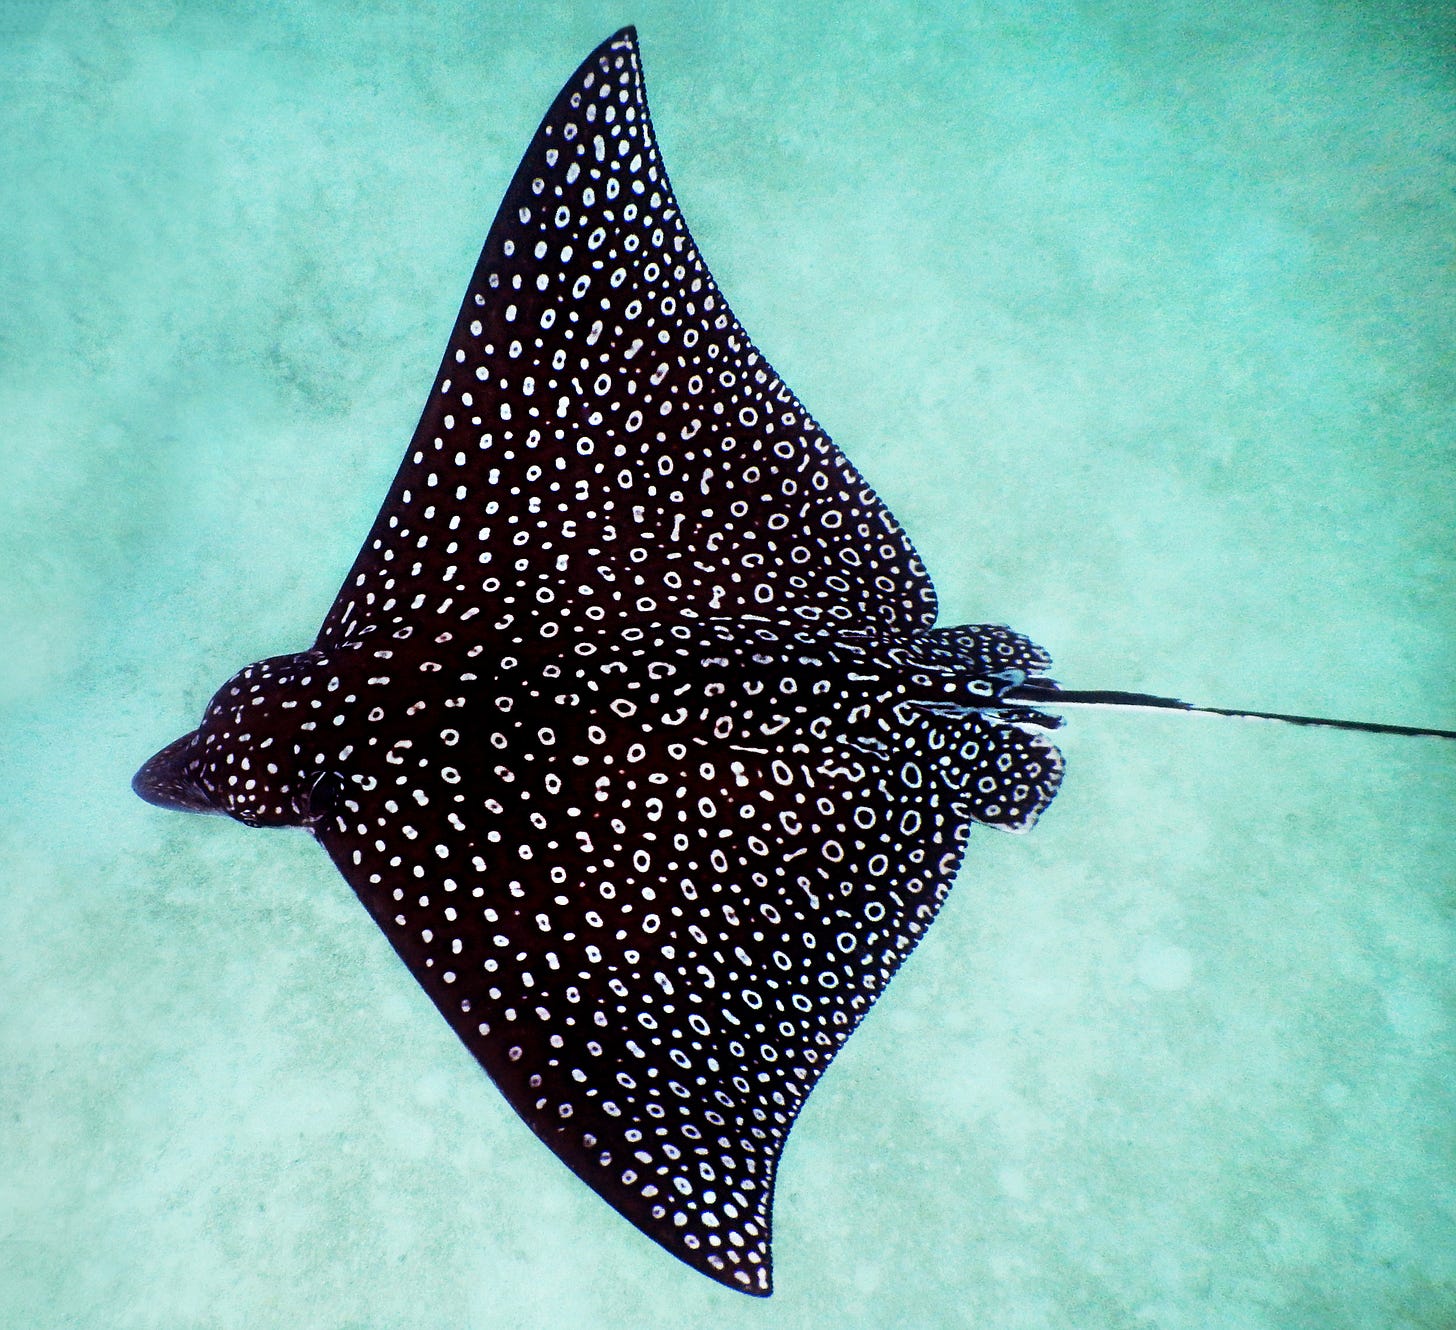 A spotted eagle ray (Aetobatus narinari) cruises over the sand in John Pennekamp Coral Reef State Park off Key Largo, FL.